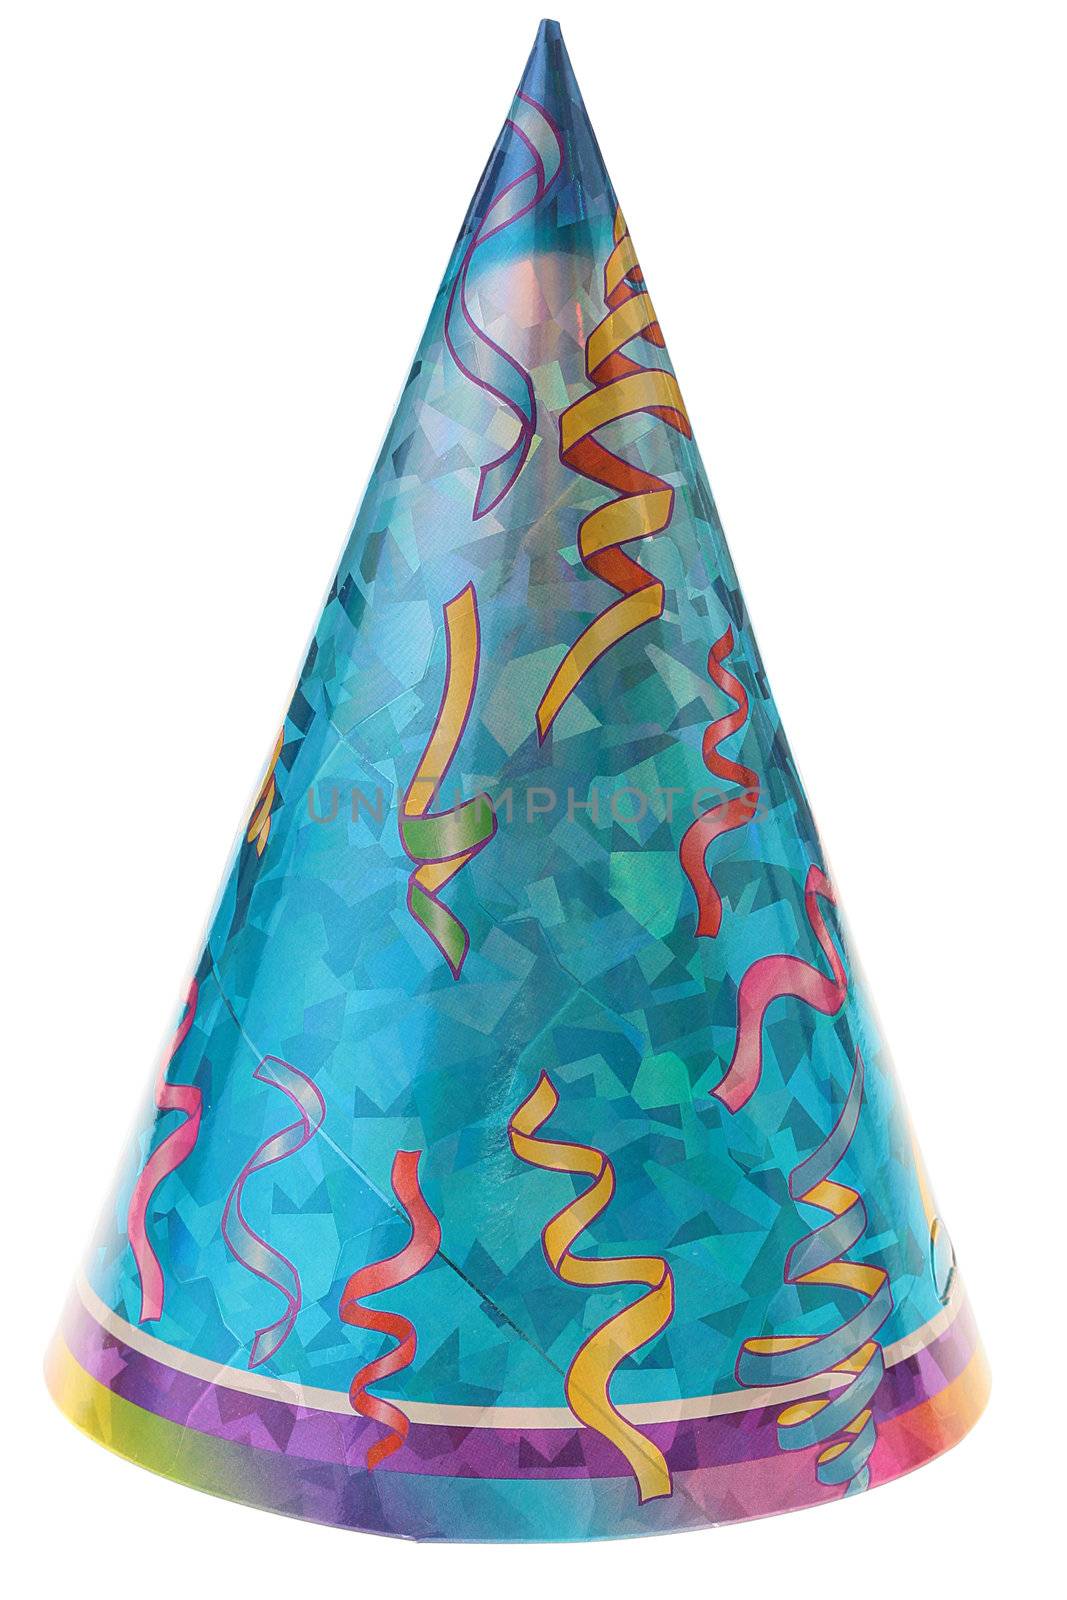 Hat in the form of a cap for celebrating of various events including birthdays.